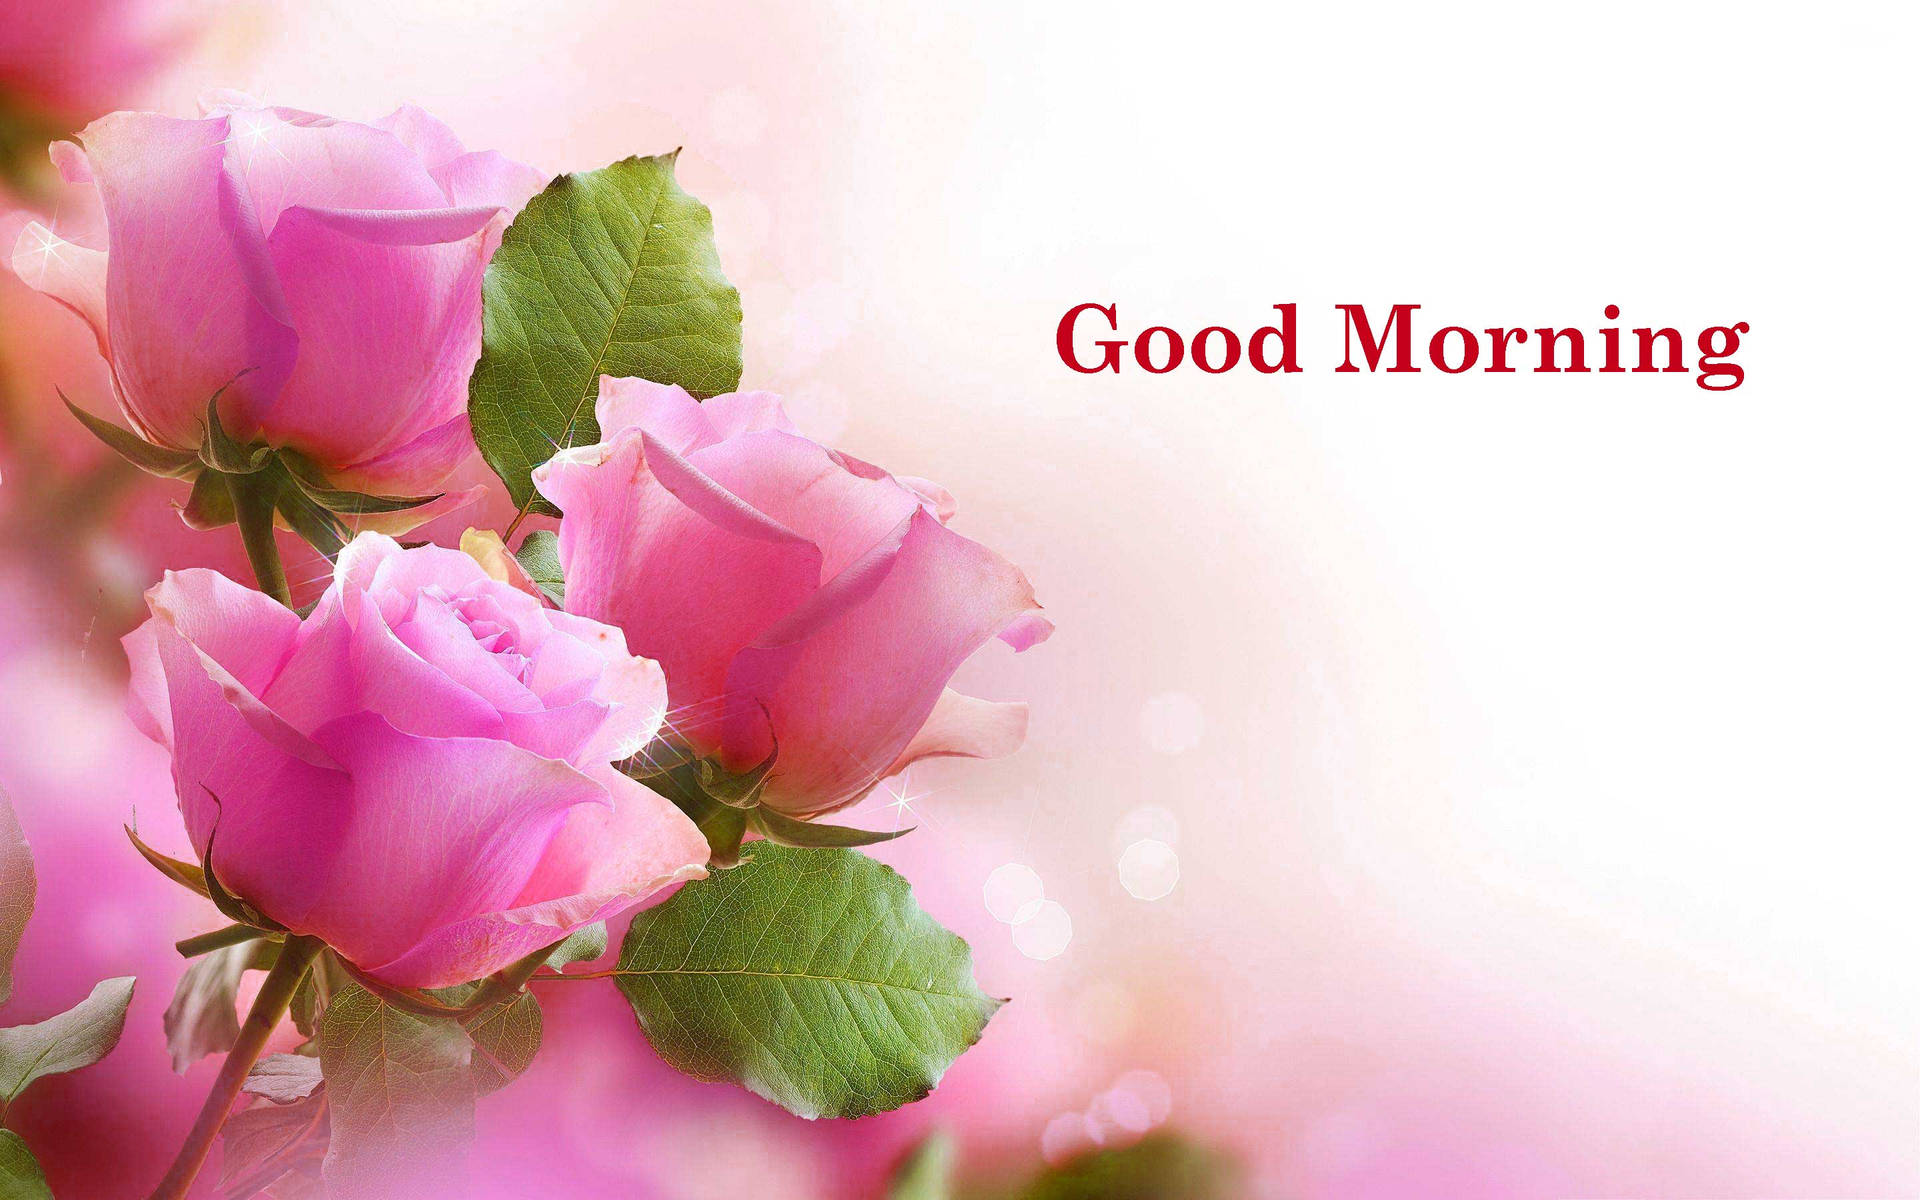 Good Morning HD With Pink Flowers Wallpaper